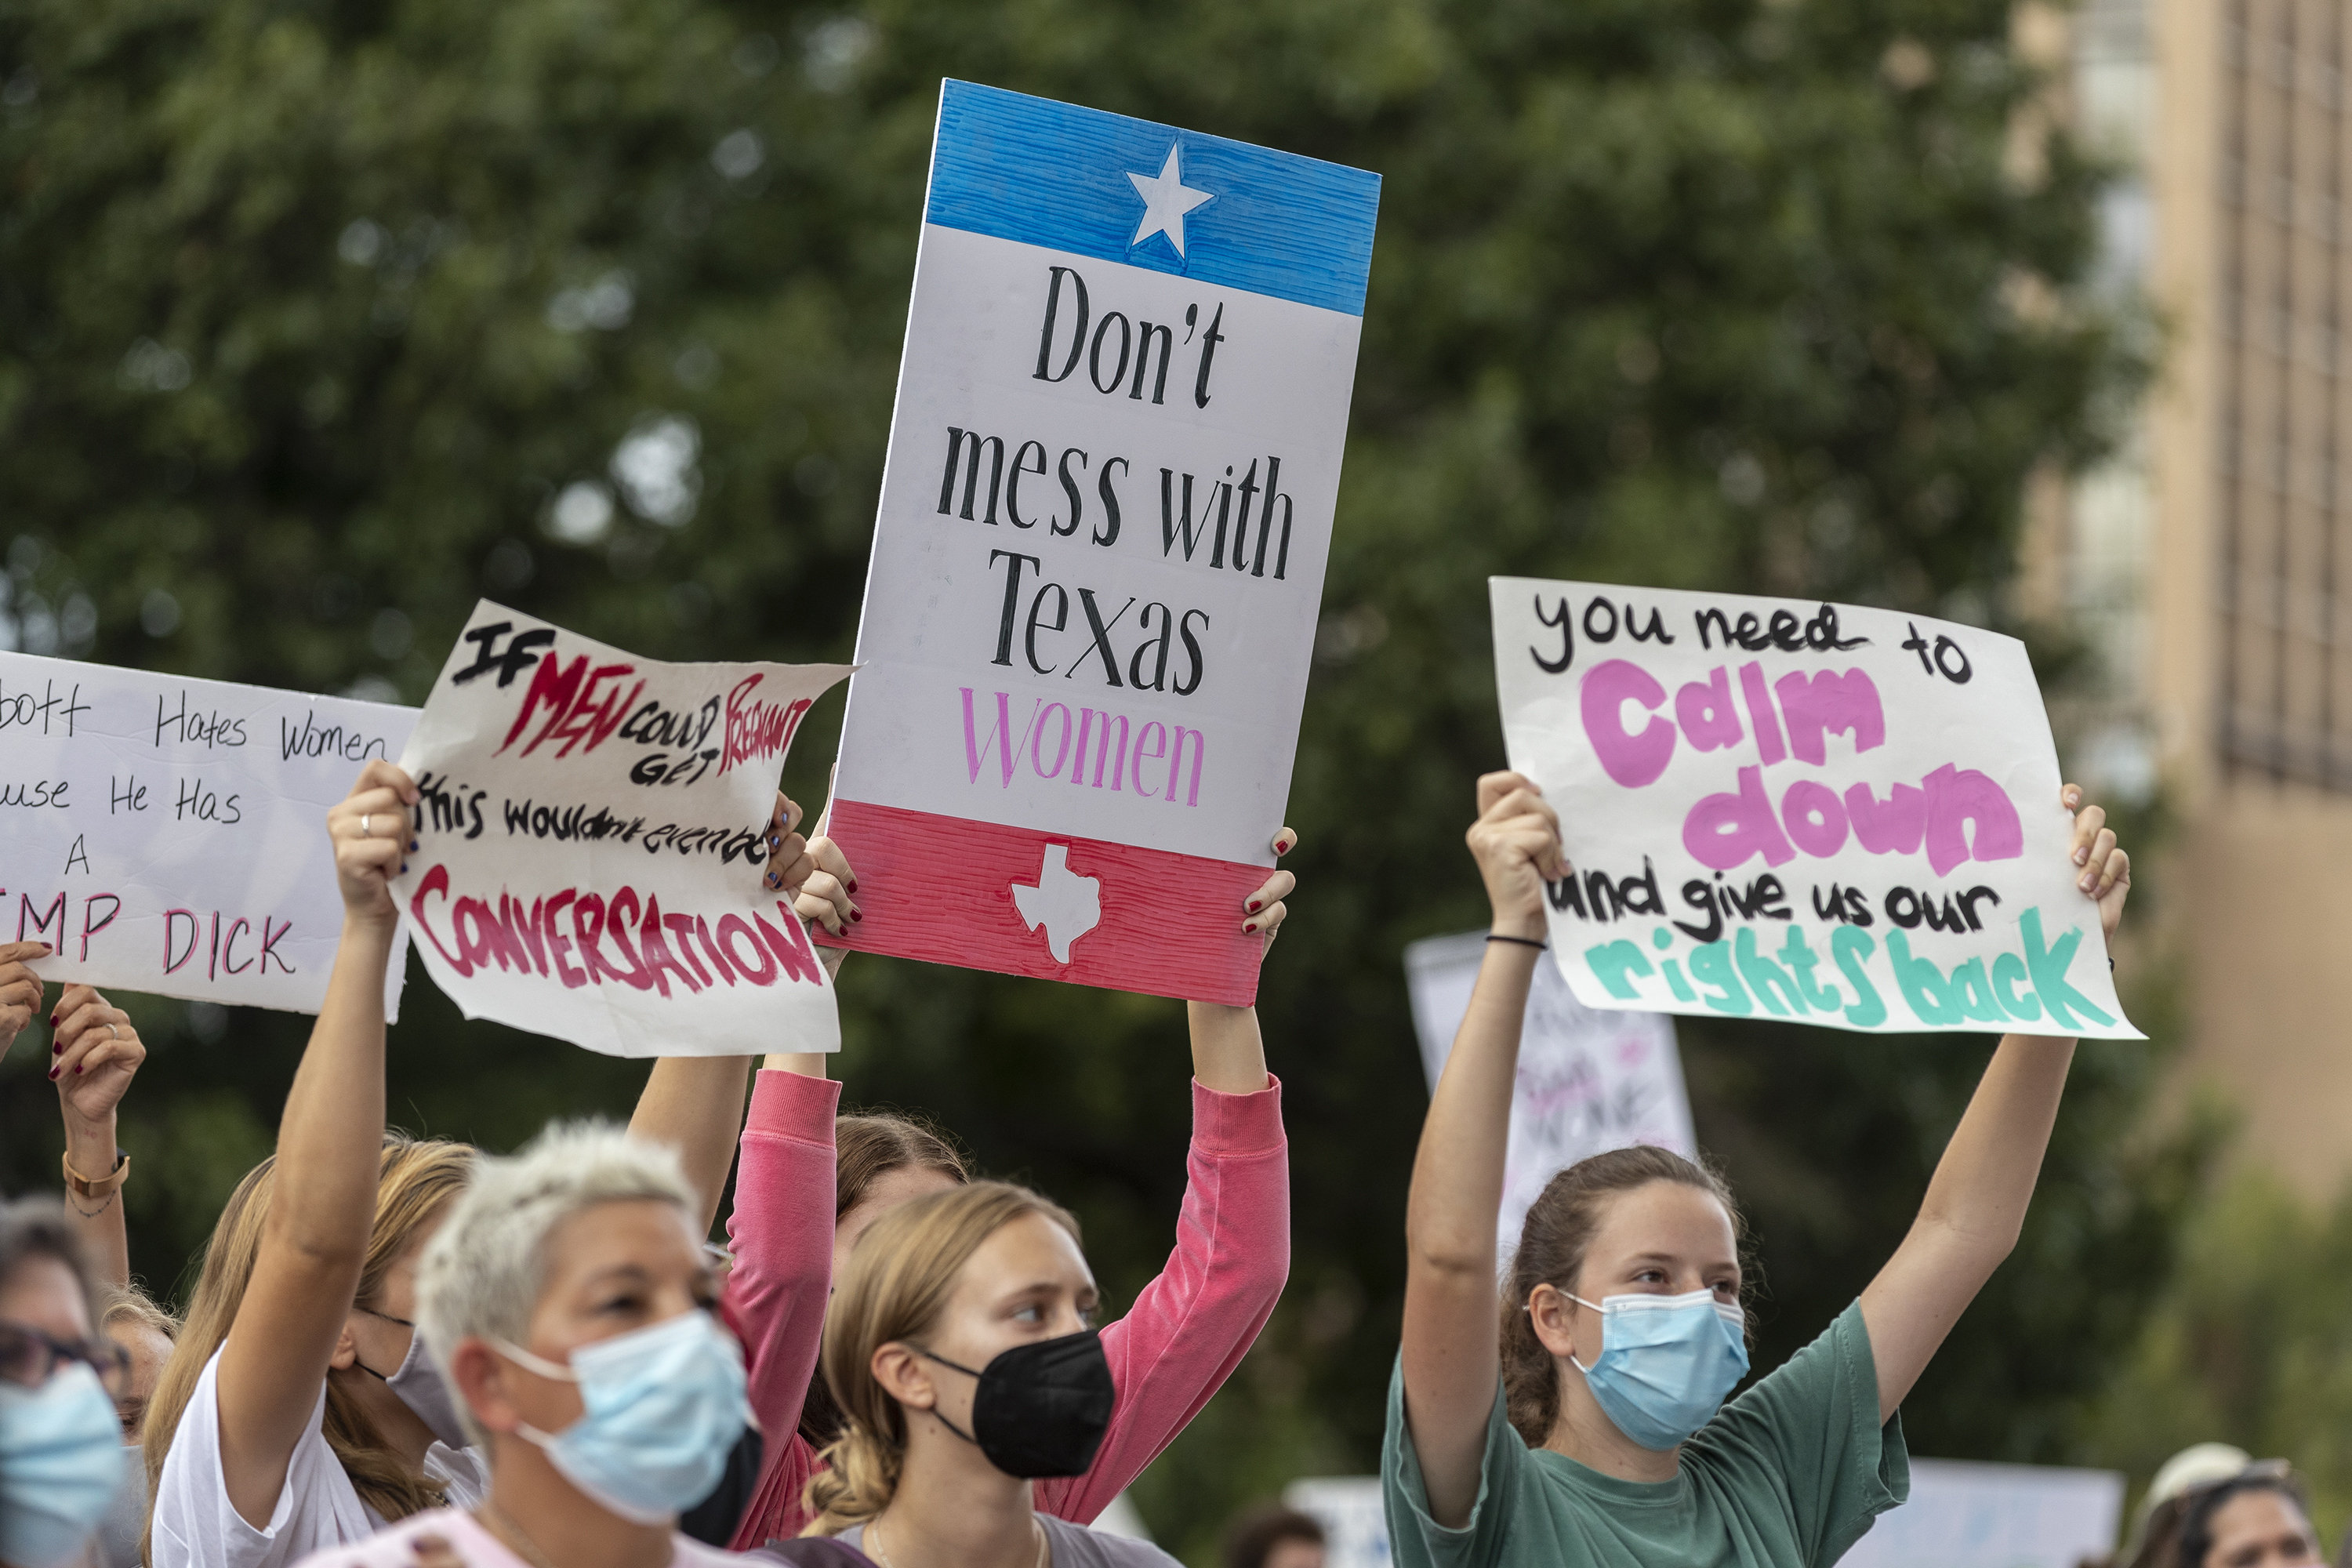 U.S. court sends Texas abortion law back to state, dealing blow to opponents